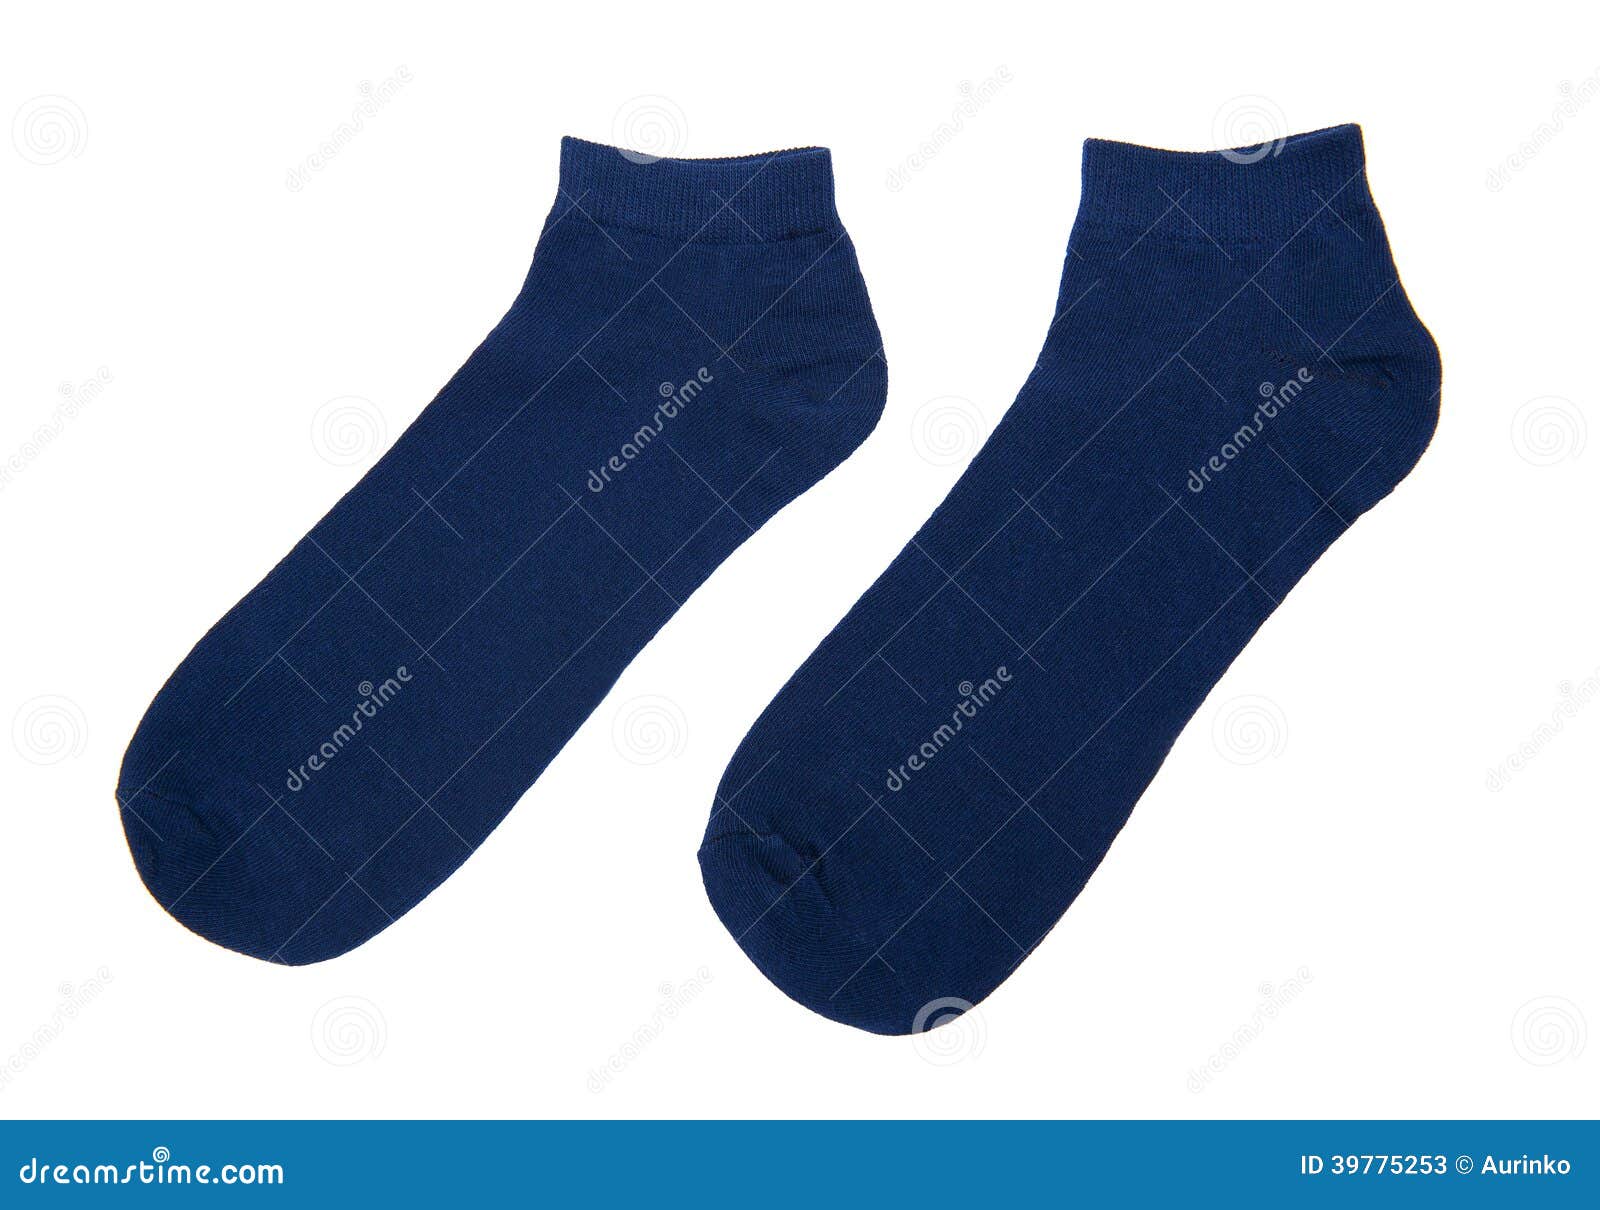 Socks stock image. Image of cloth, knitwear, clothes - 39775253